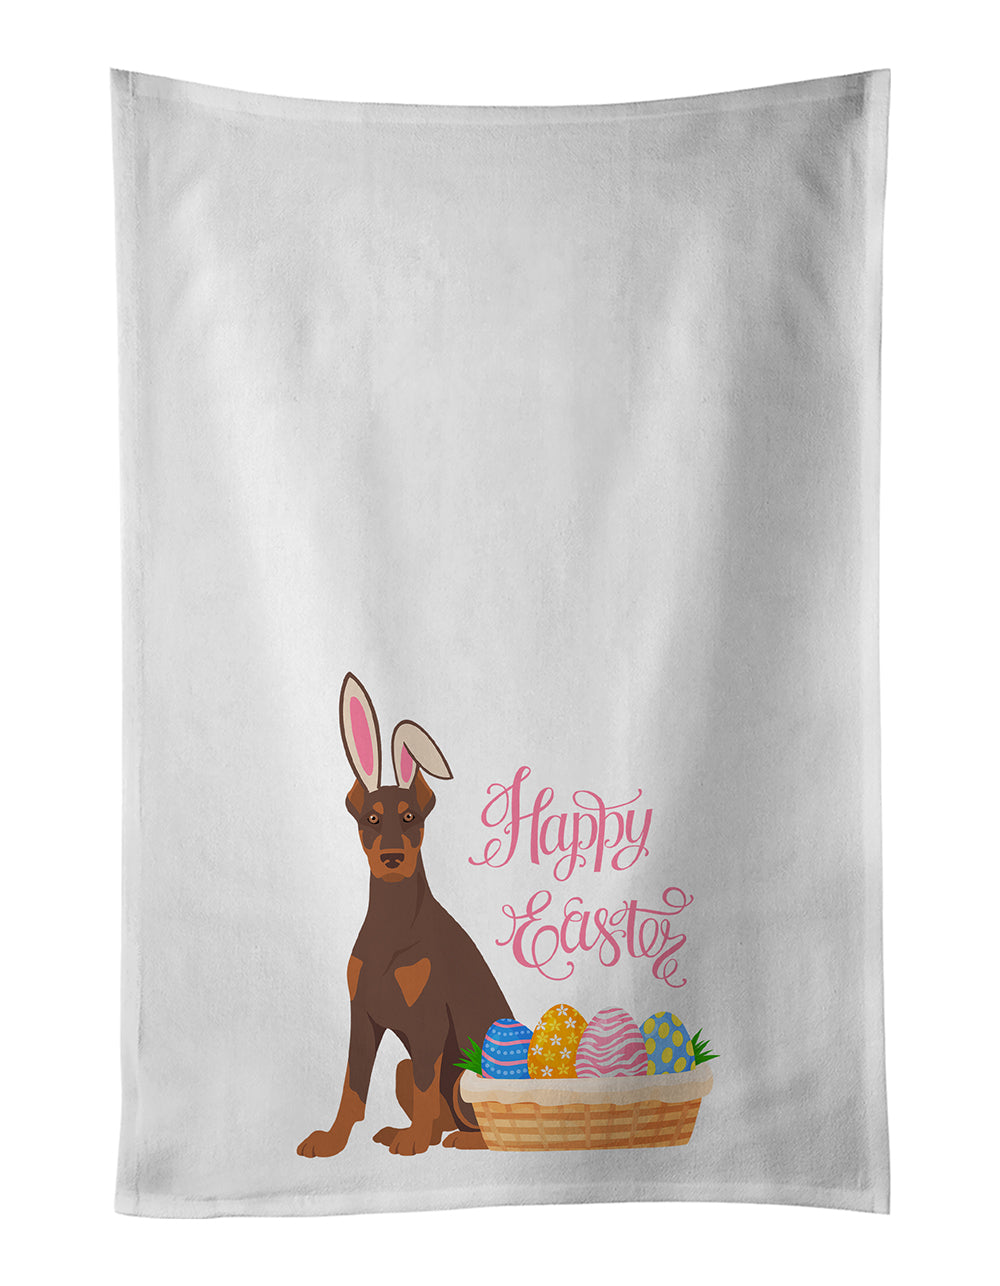 Buy this Red and Tan Doberman Pinscher Easter White Kitchen Towel Set of 2 Dish Towels